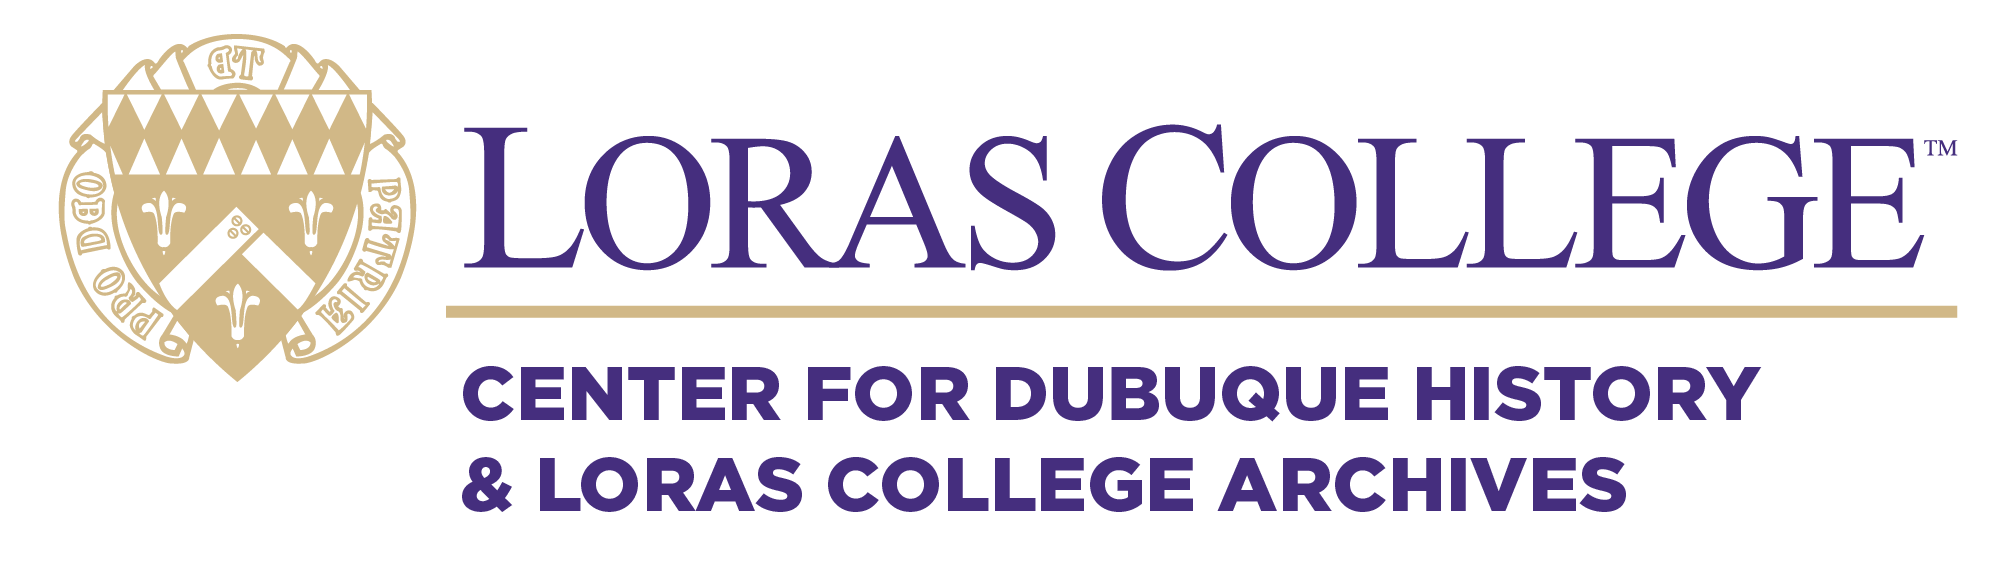 Loras College Center for Dubuque History and Archive Logo